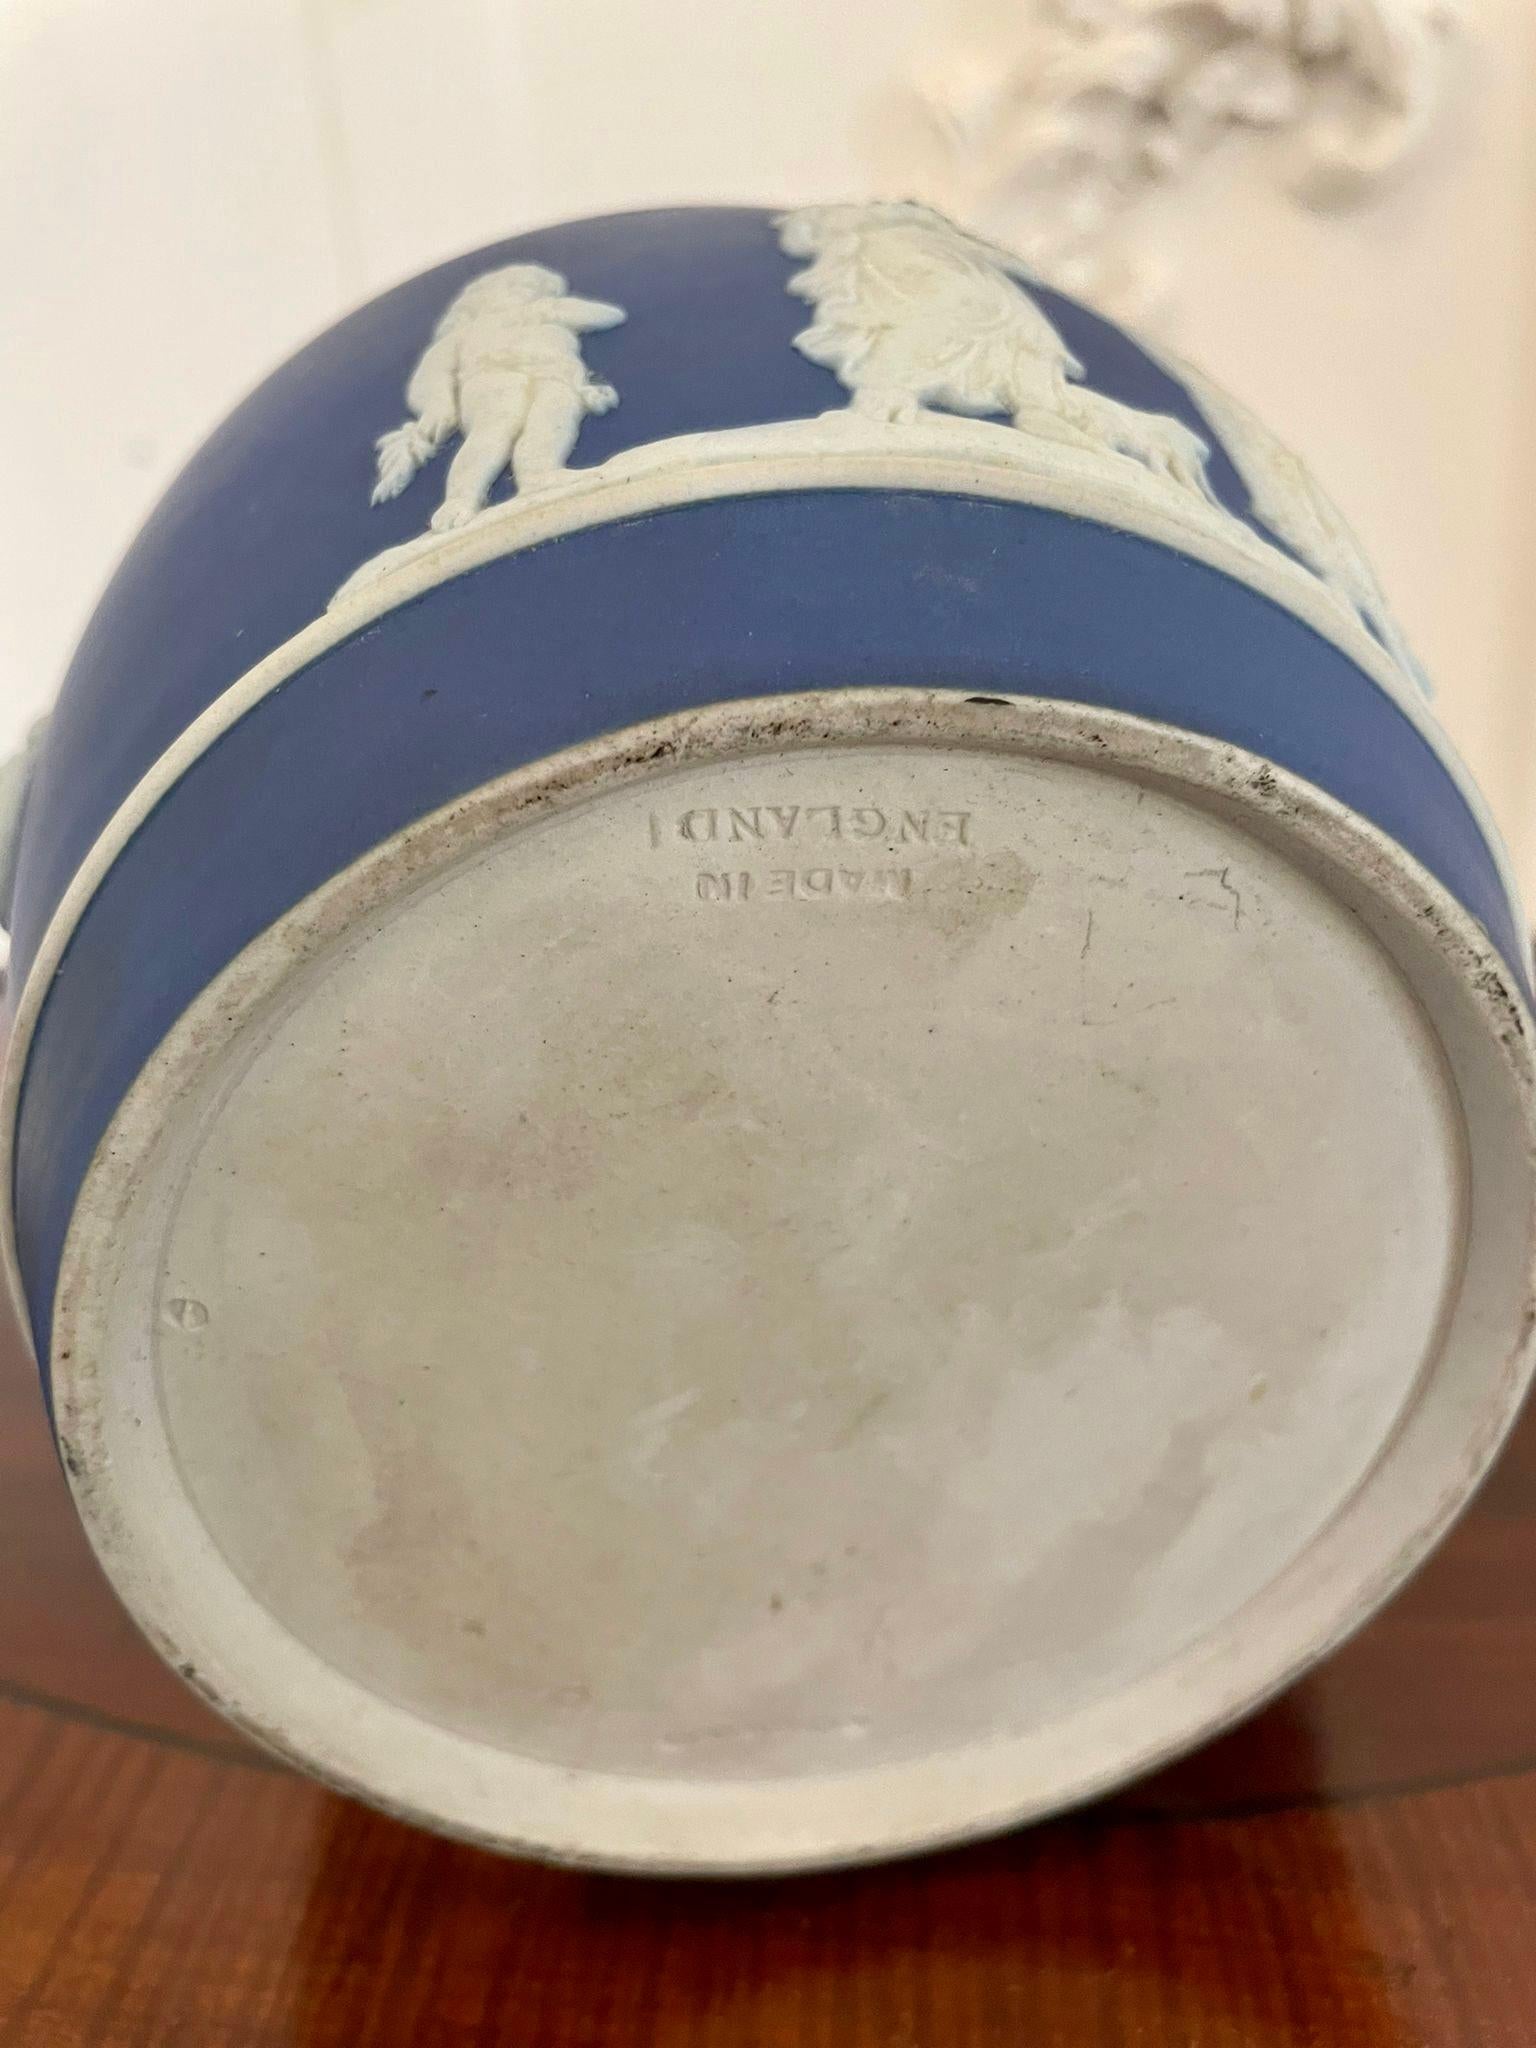 Antique Edwardian quality Wedgwood Jasperware biscuit barrel having a quality silver plated top above a Wedgwood Jasperware biscuit barrel with traditional decoration

In lovely original condition

Measures: H 21 x W 25 x D 15cm 
Date 1900.
 